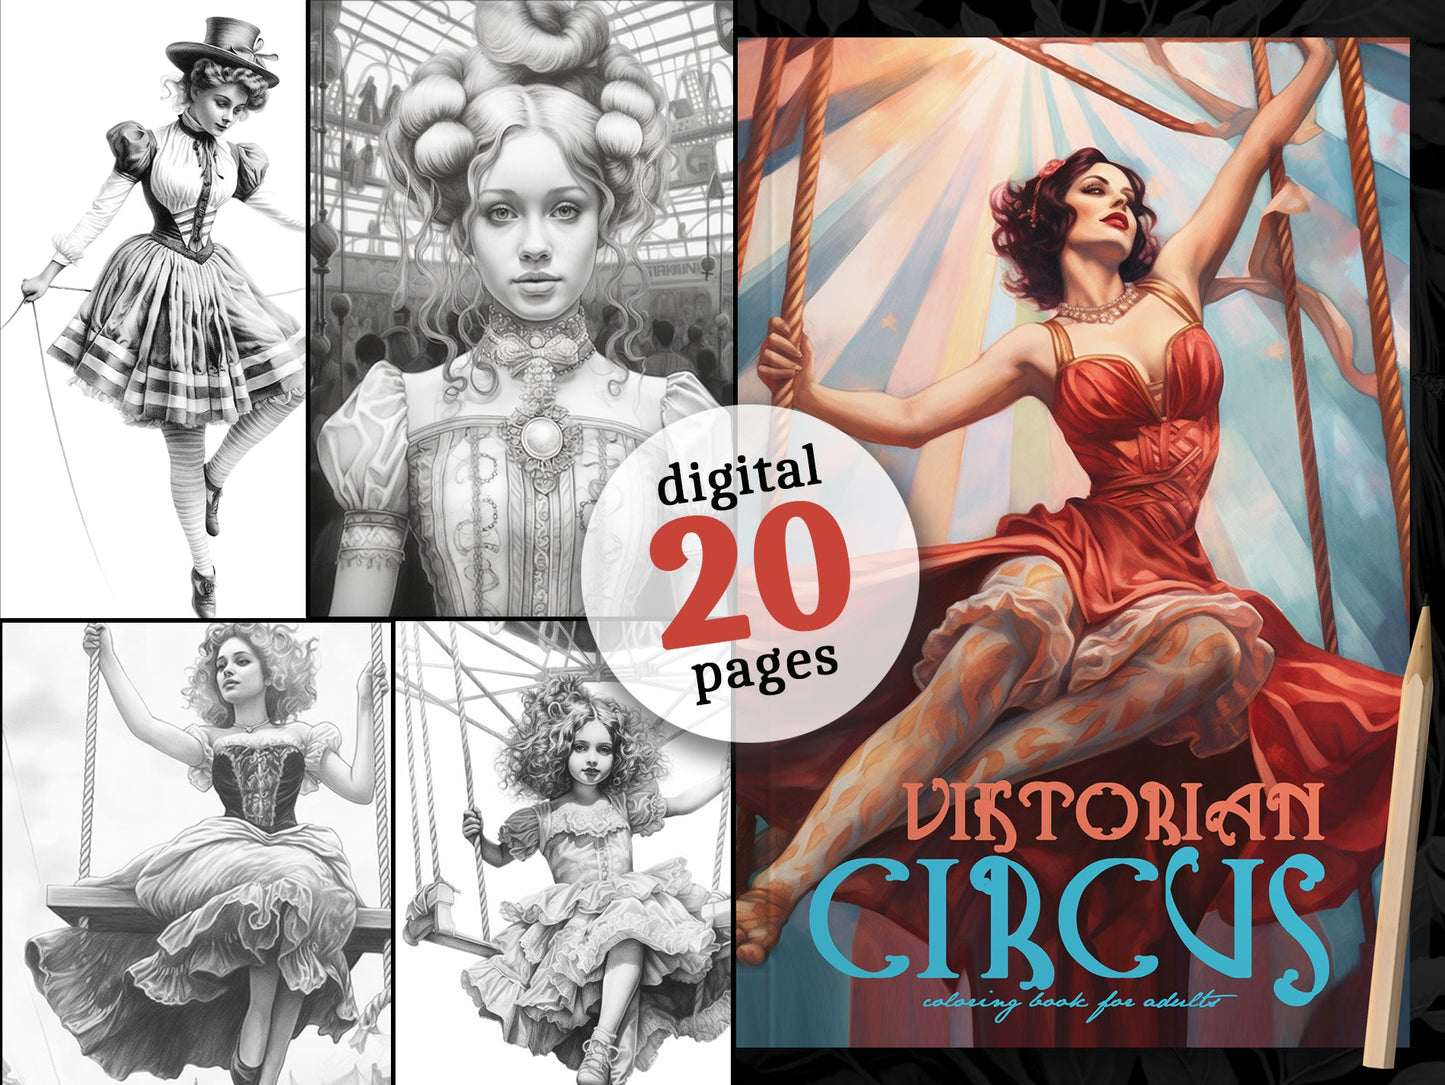 Victorian Circus Coloring Book Grayscale (Digital) - Monsoon Publishing USA